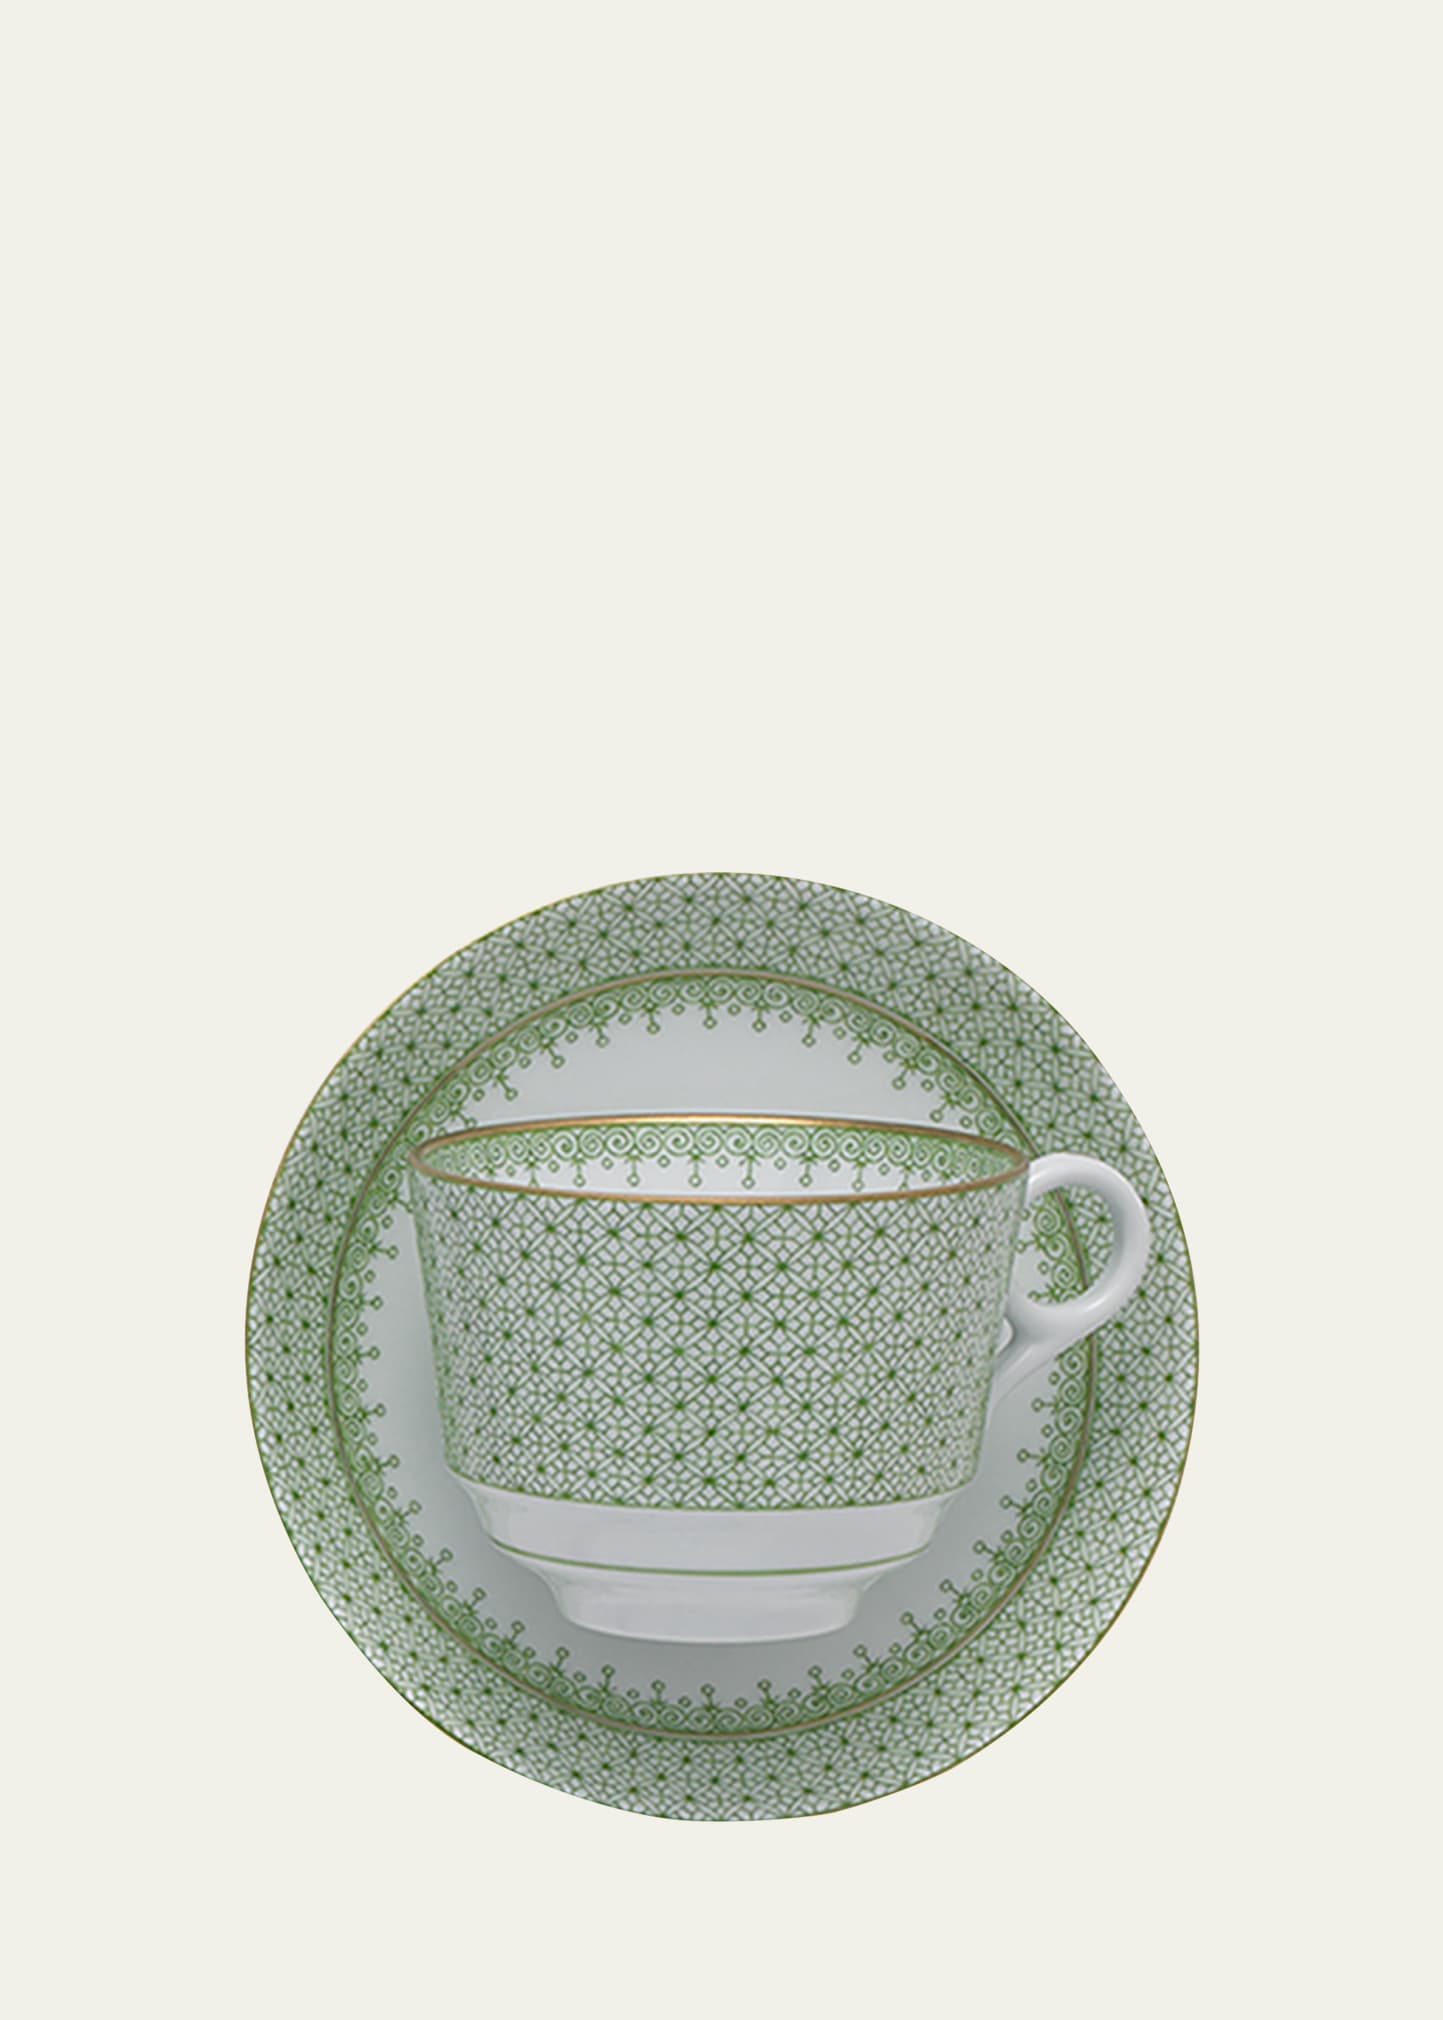 Mottahedeh Apple Lace Tea Cup & Saucer Plate In Lt. Green